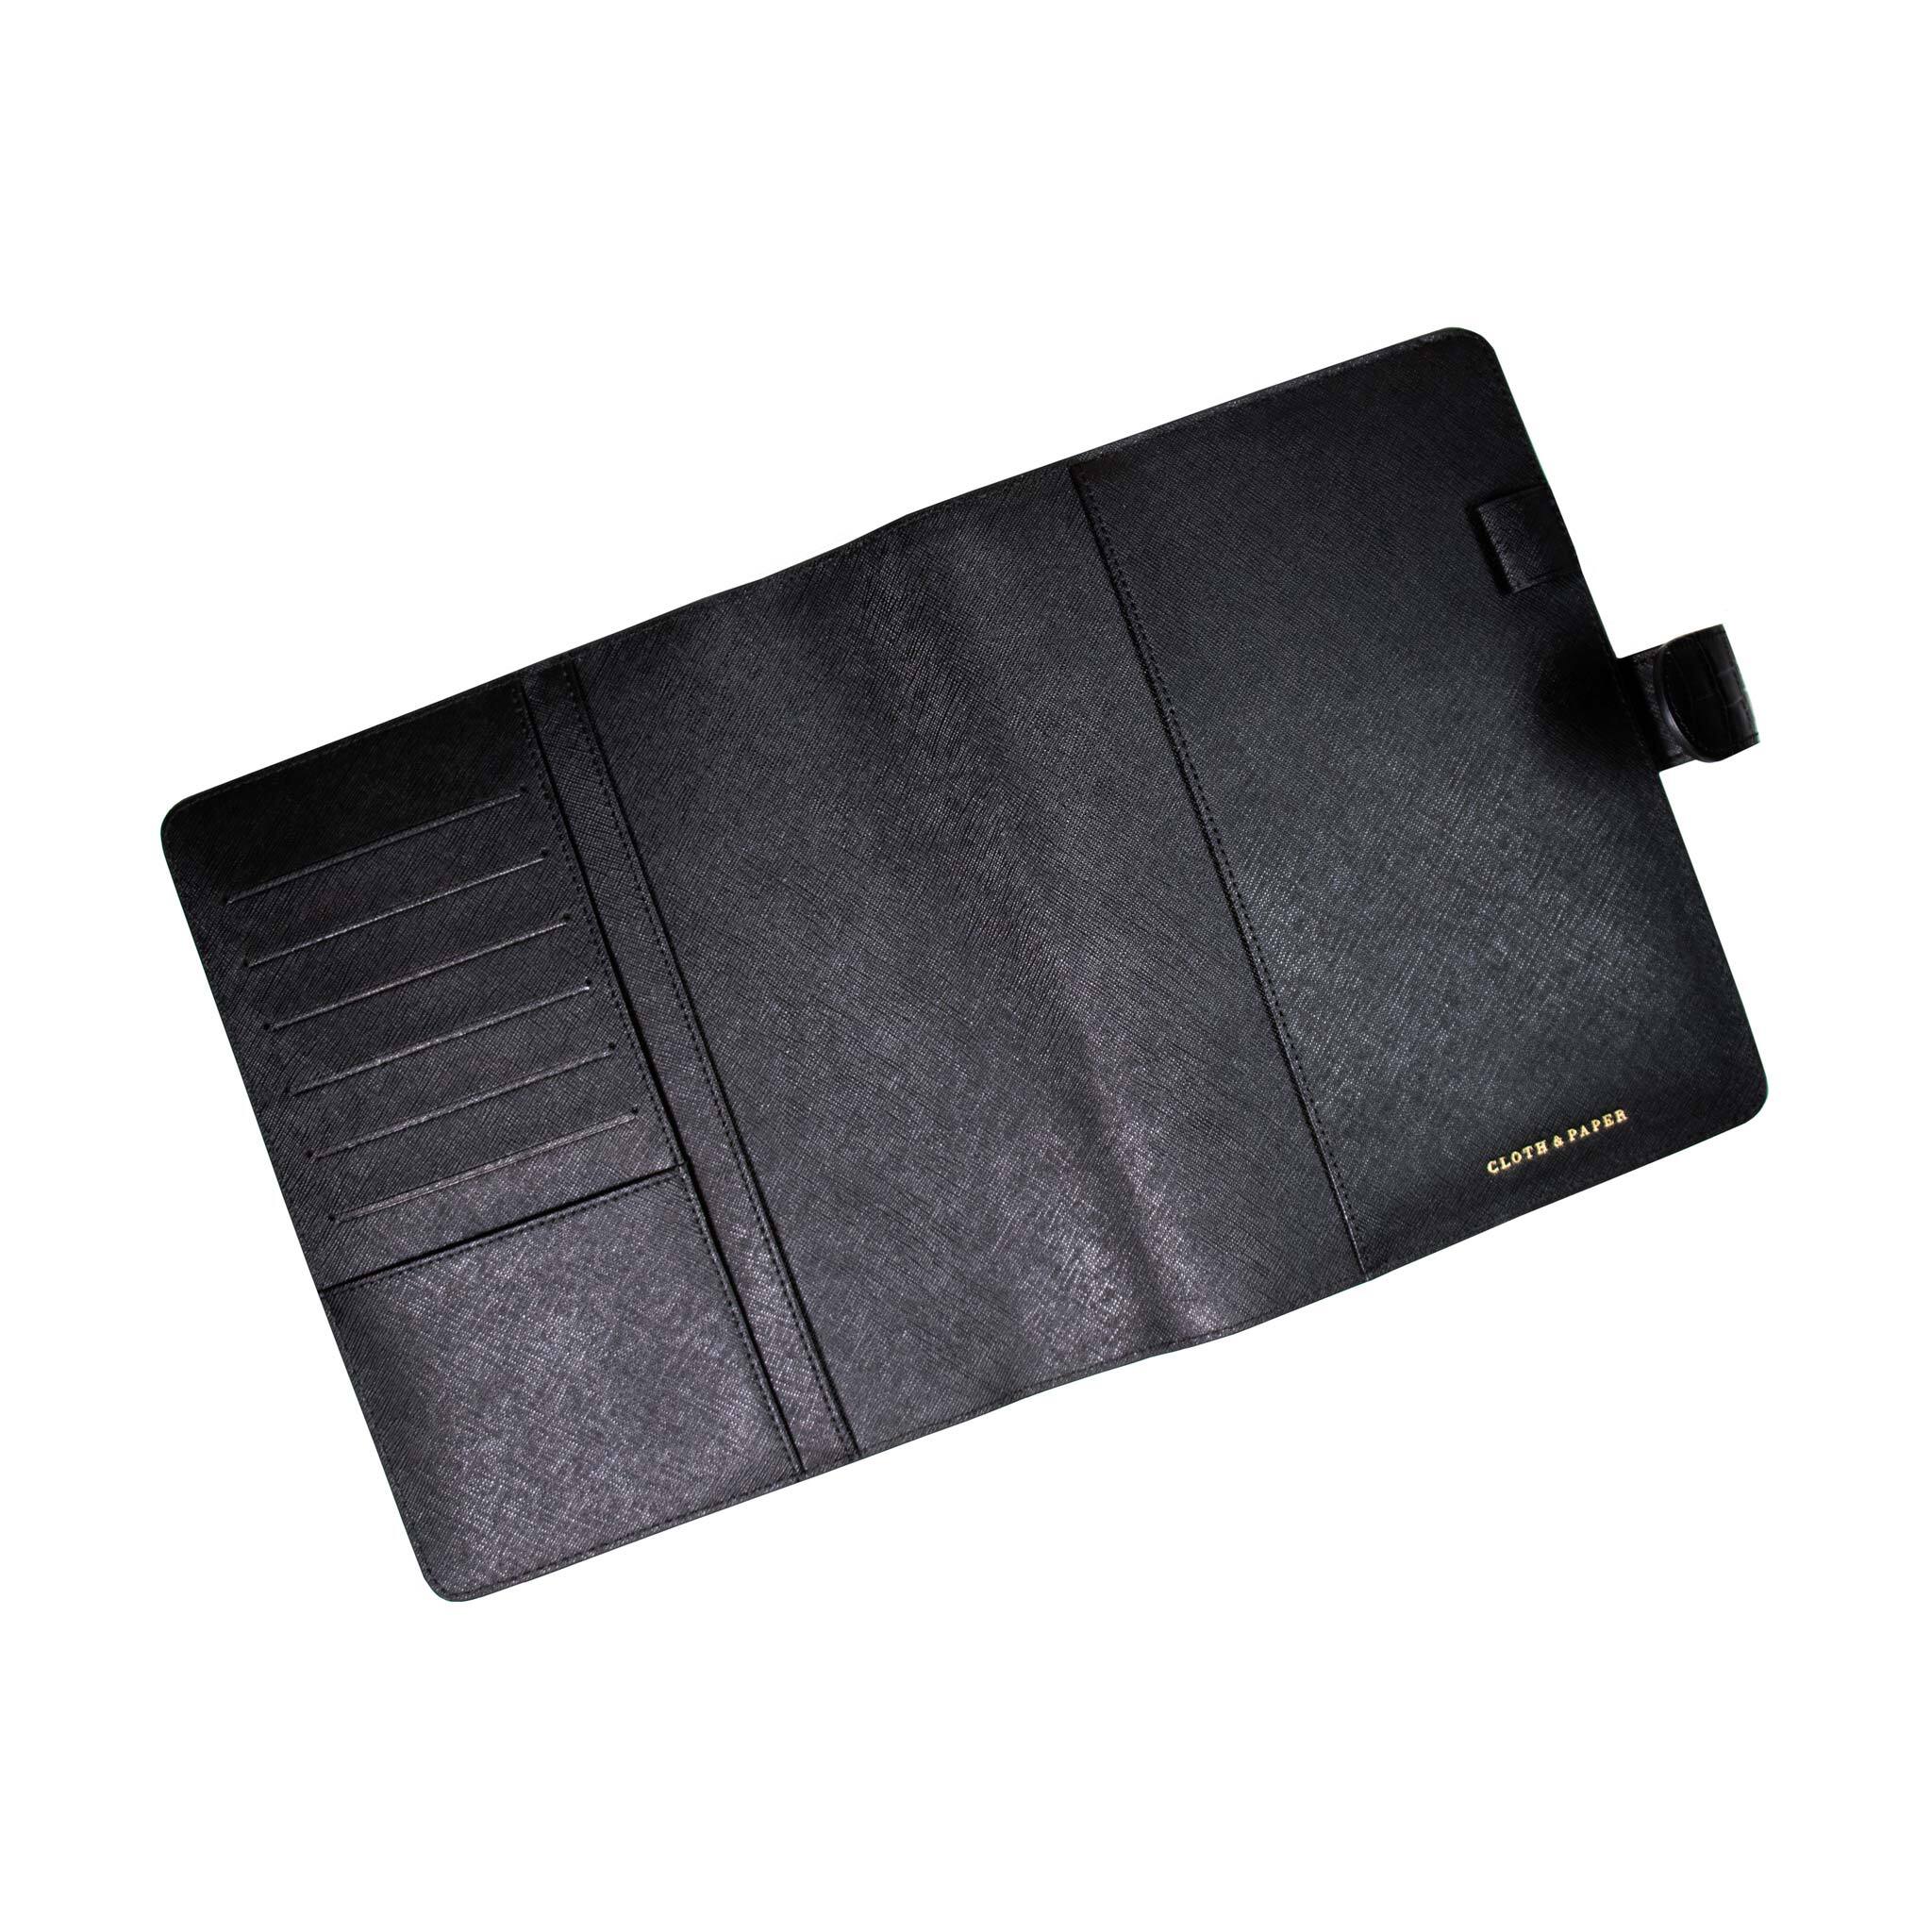 Agenda Cover, Large, Croc Leather